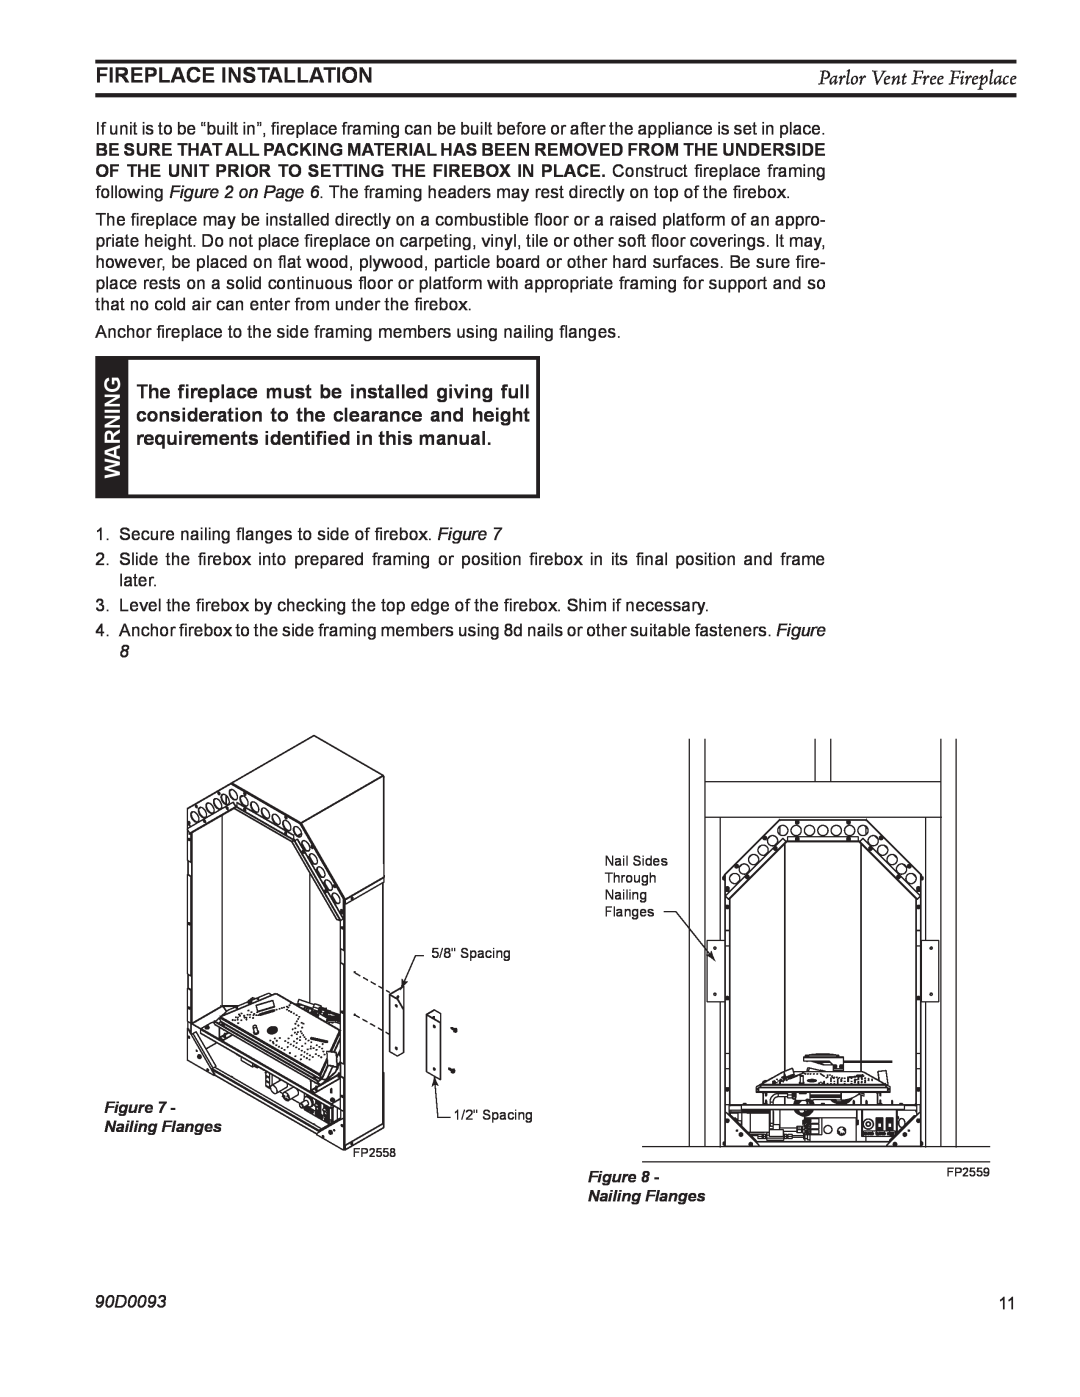 Monessen Hearth PL20 operating instructions Fireplace Installation, Parlor Vent Free Fireplace, 90D0093, Nailing Flanges 